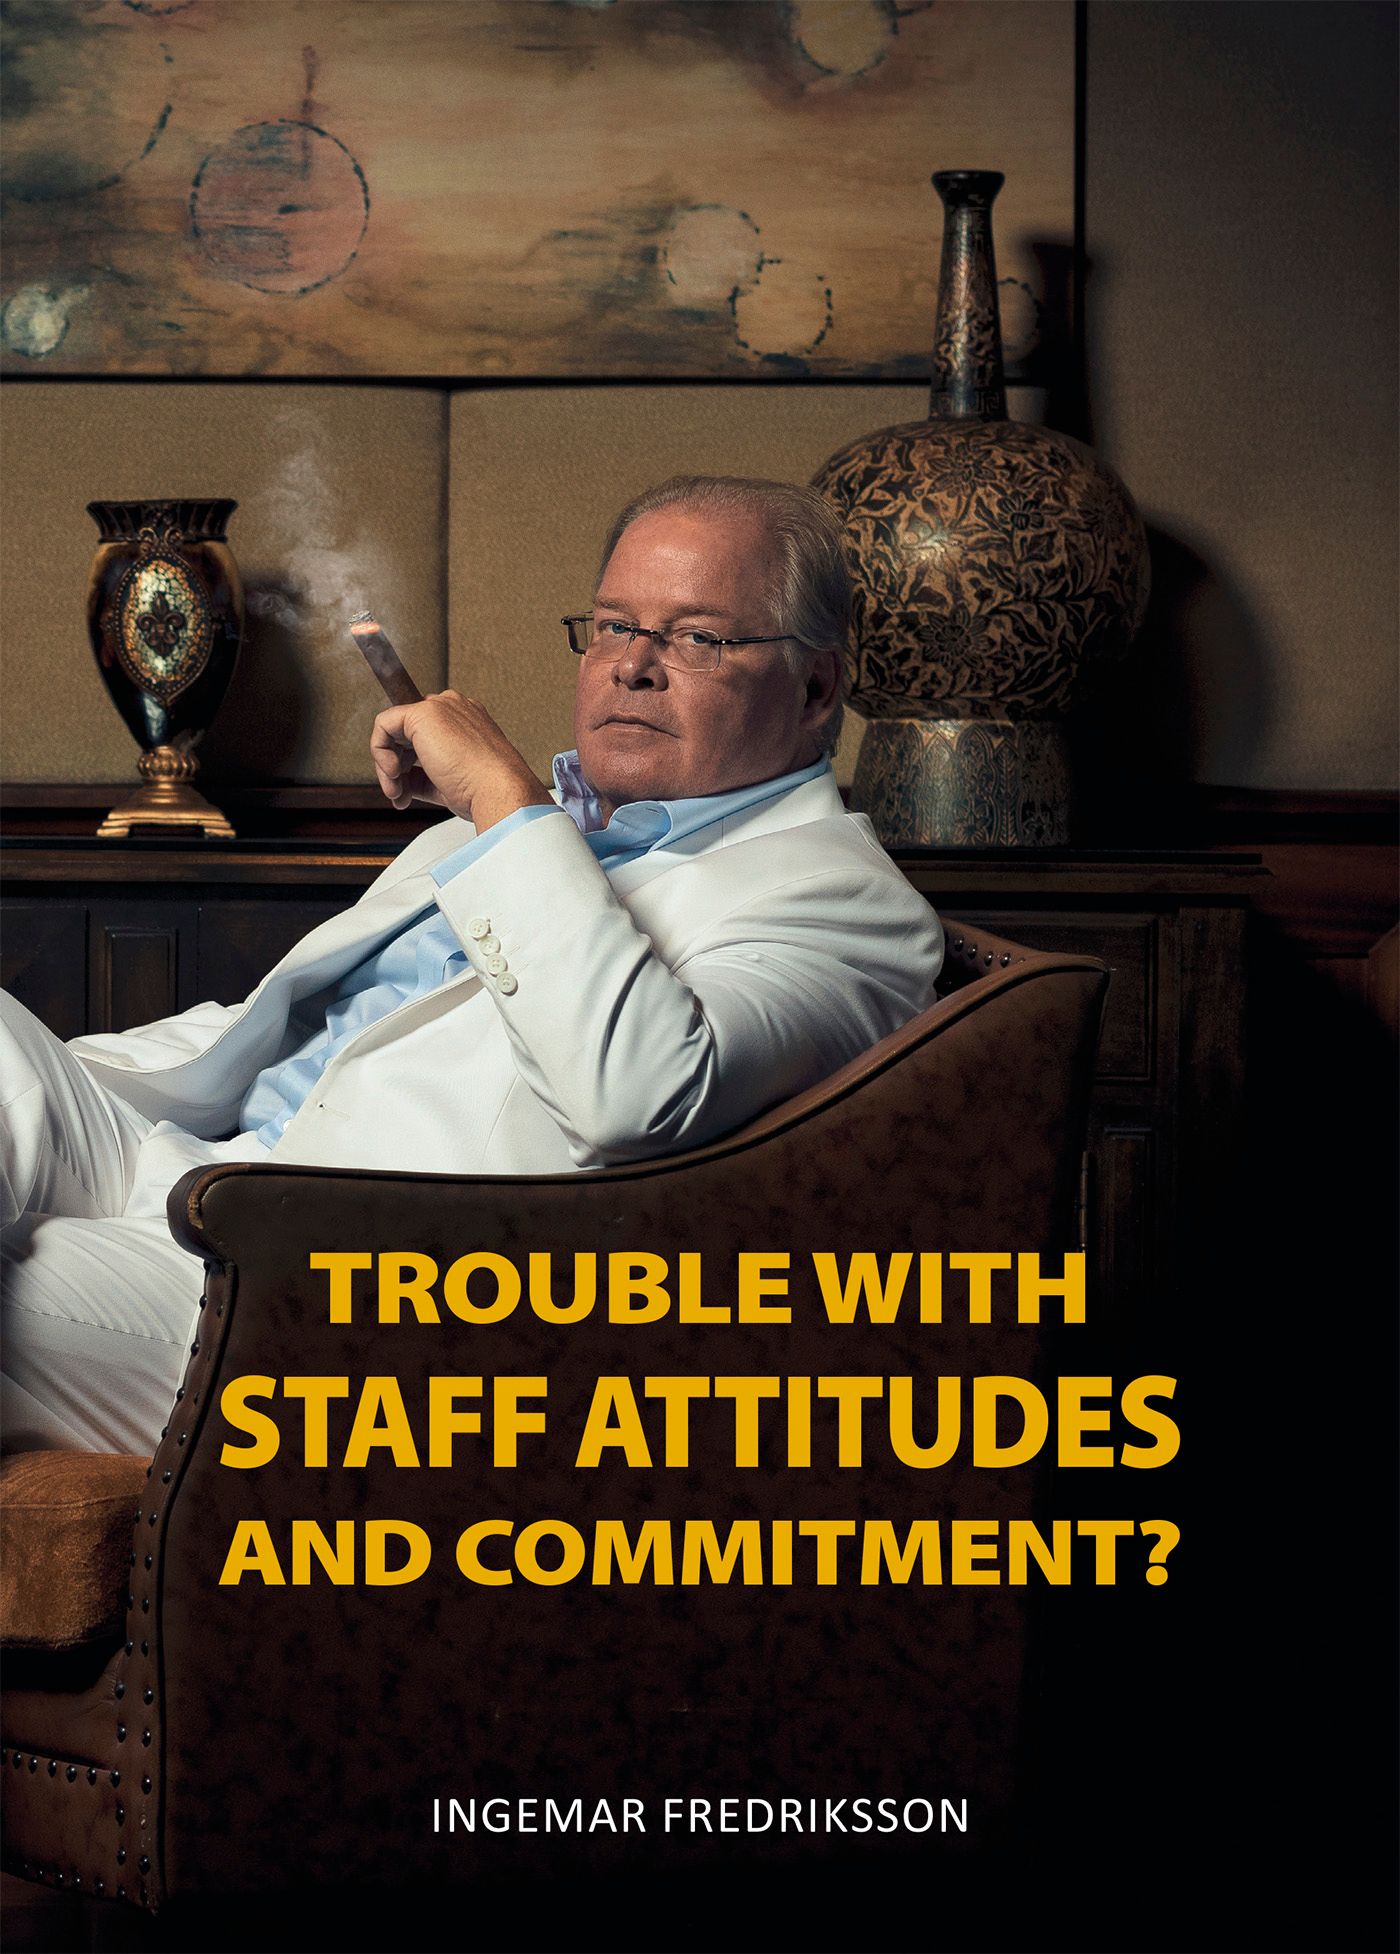 Trouble with staff attitudes and commitment?, eBook by Ingemar Fredriksson